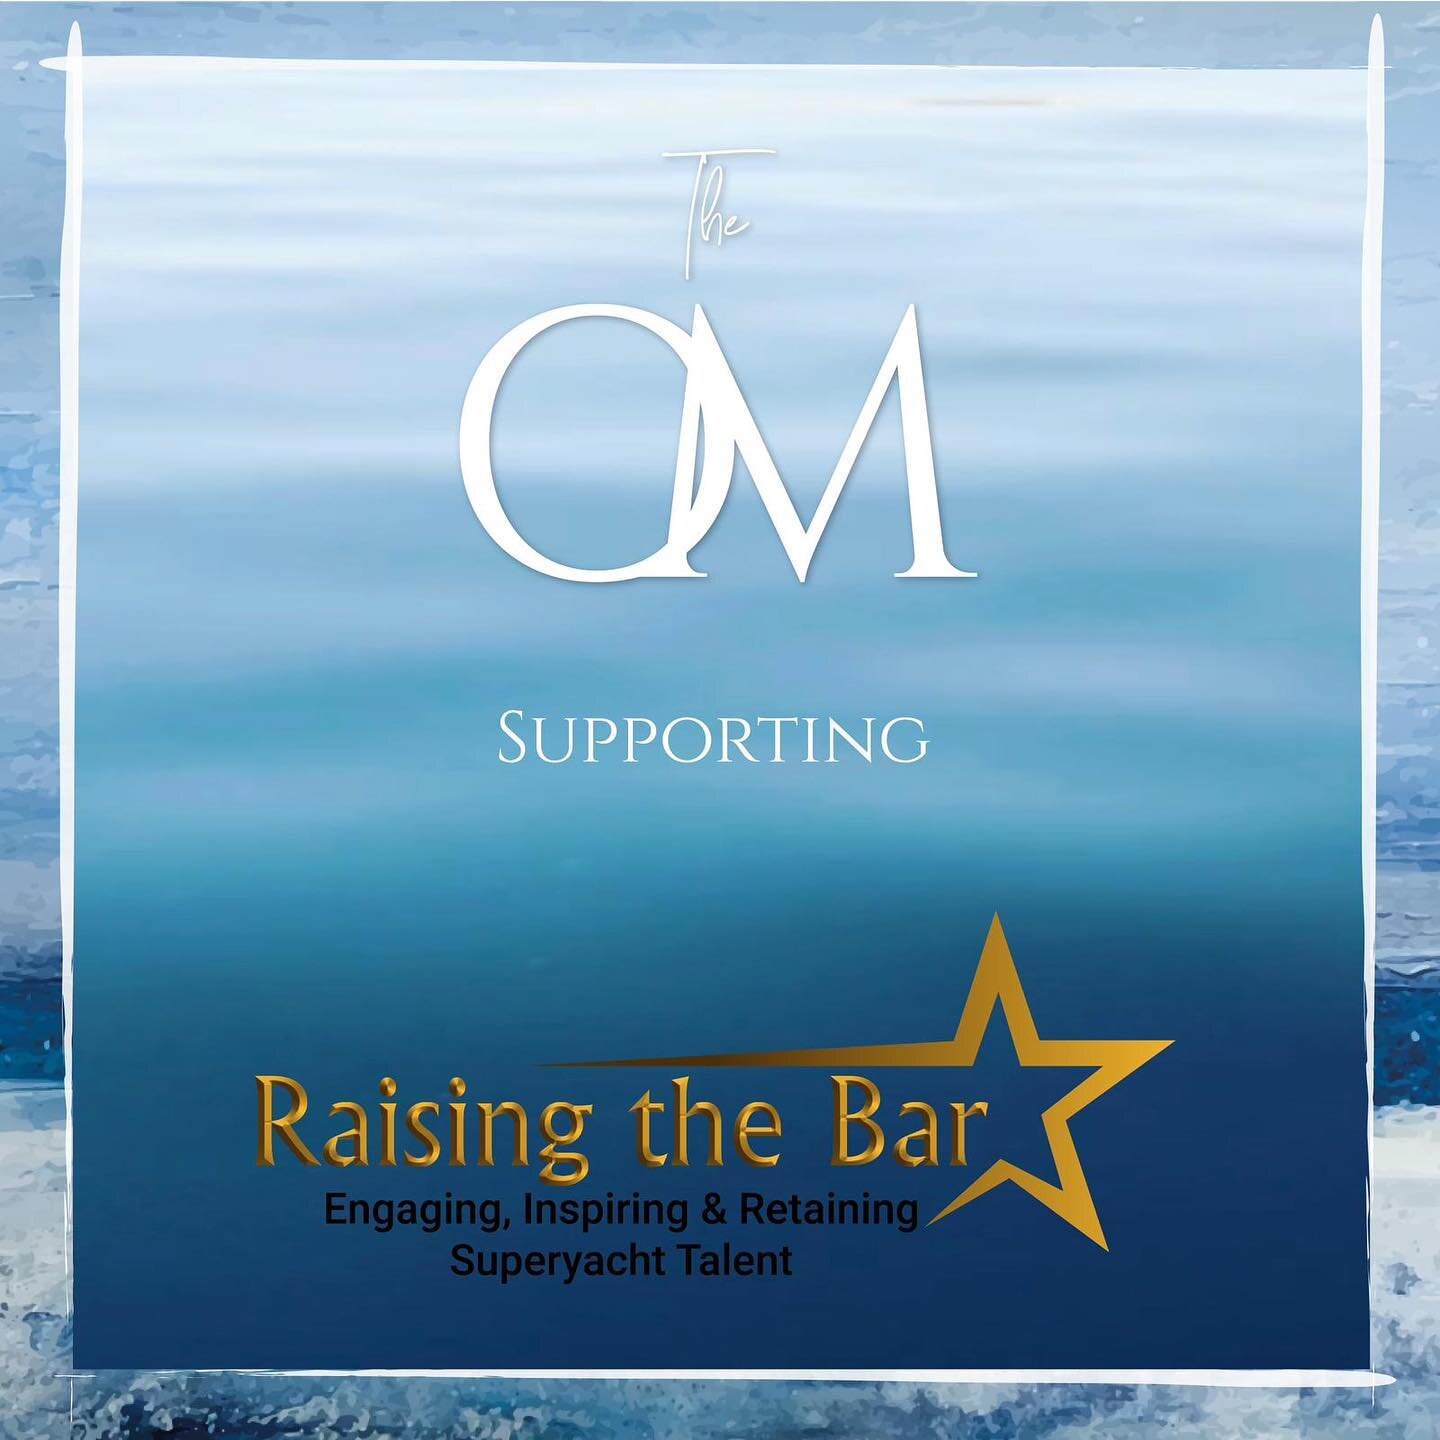 One of the over arching aims of my work at THE OM is to support the sustainability of crew careers. 

Two years ago I was delighted to be asked to be a member of the &ldquo;Raising The Bar&rdquo; initiative, a thinktank of experts from across the sup